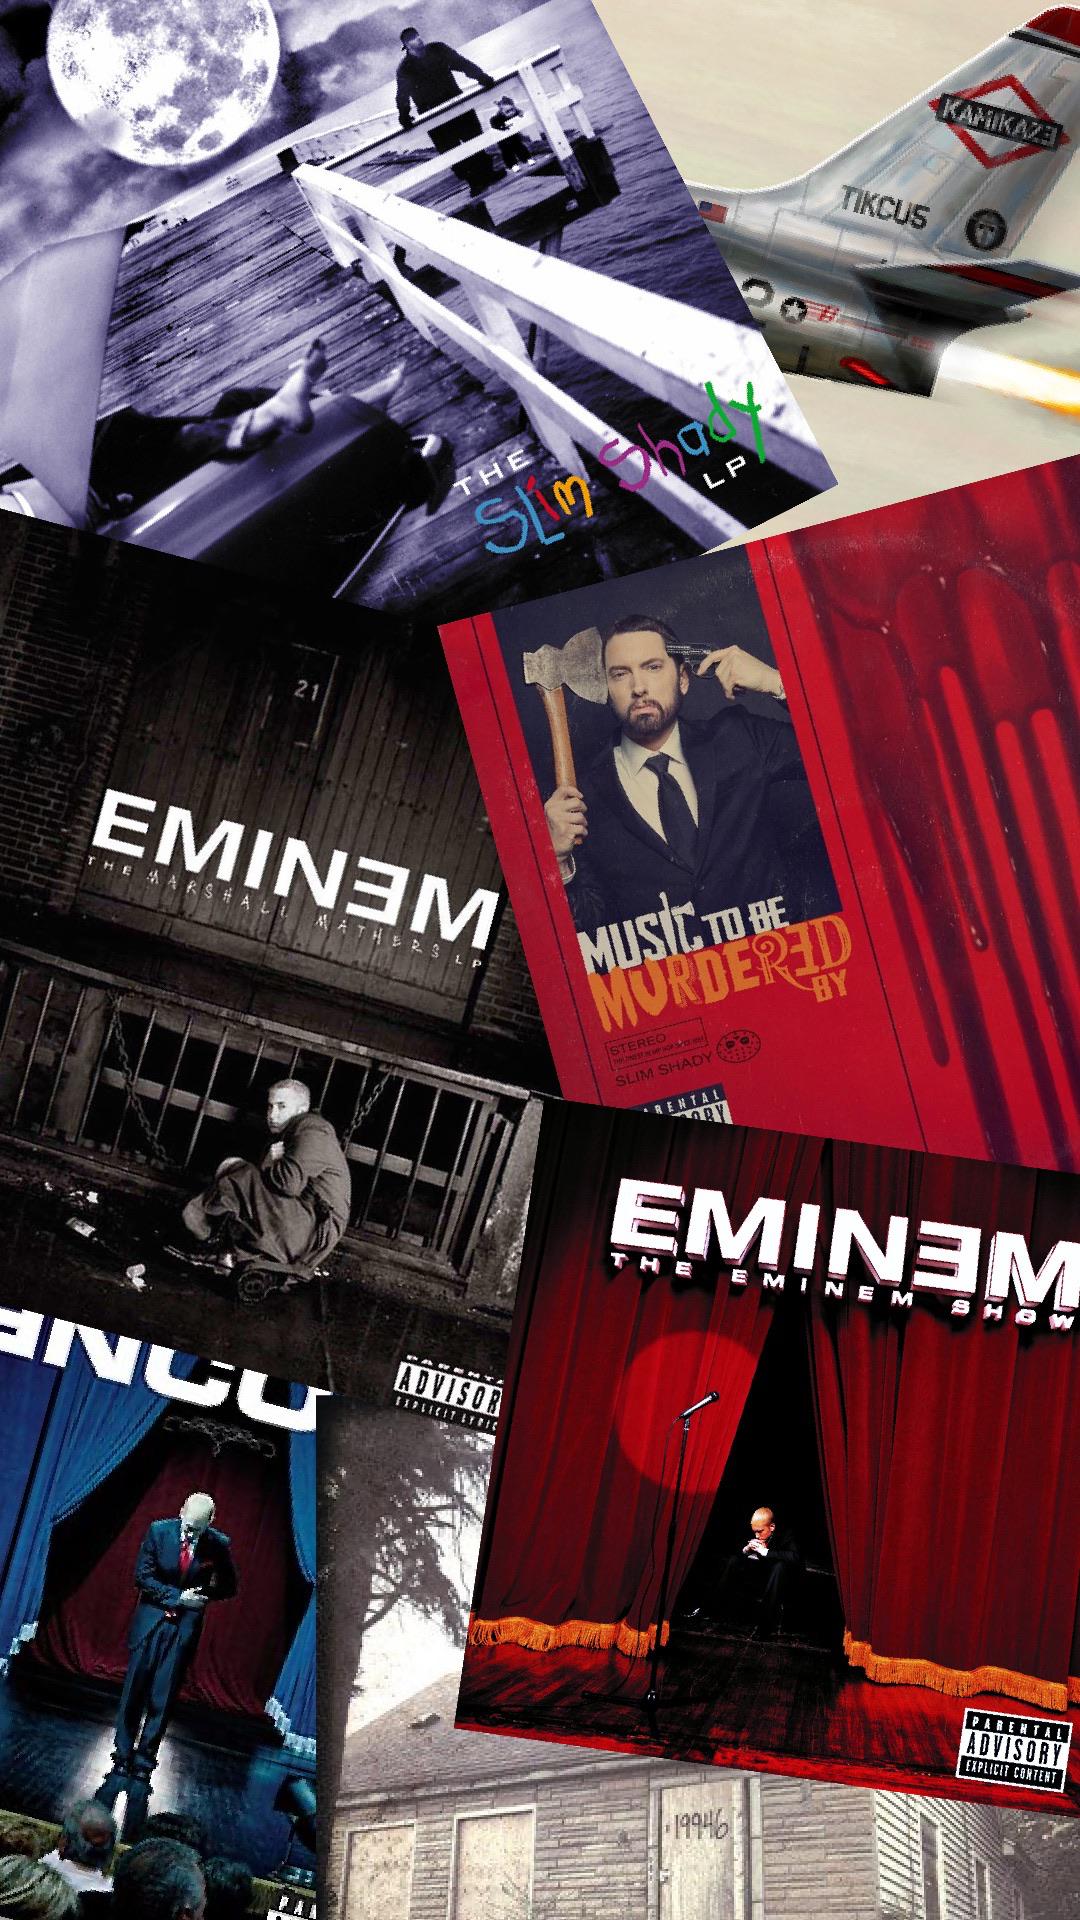 Made a wallpaper out of eminem albums